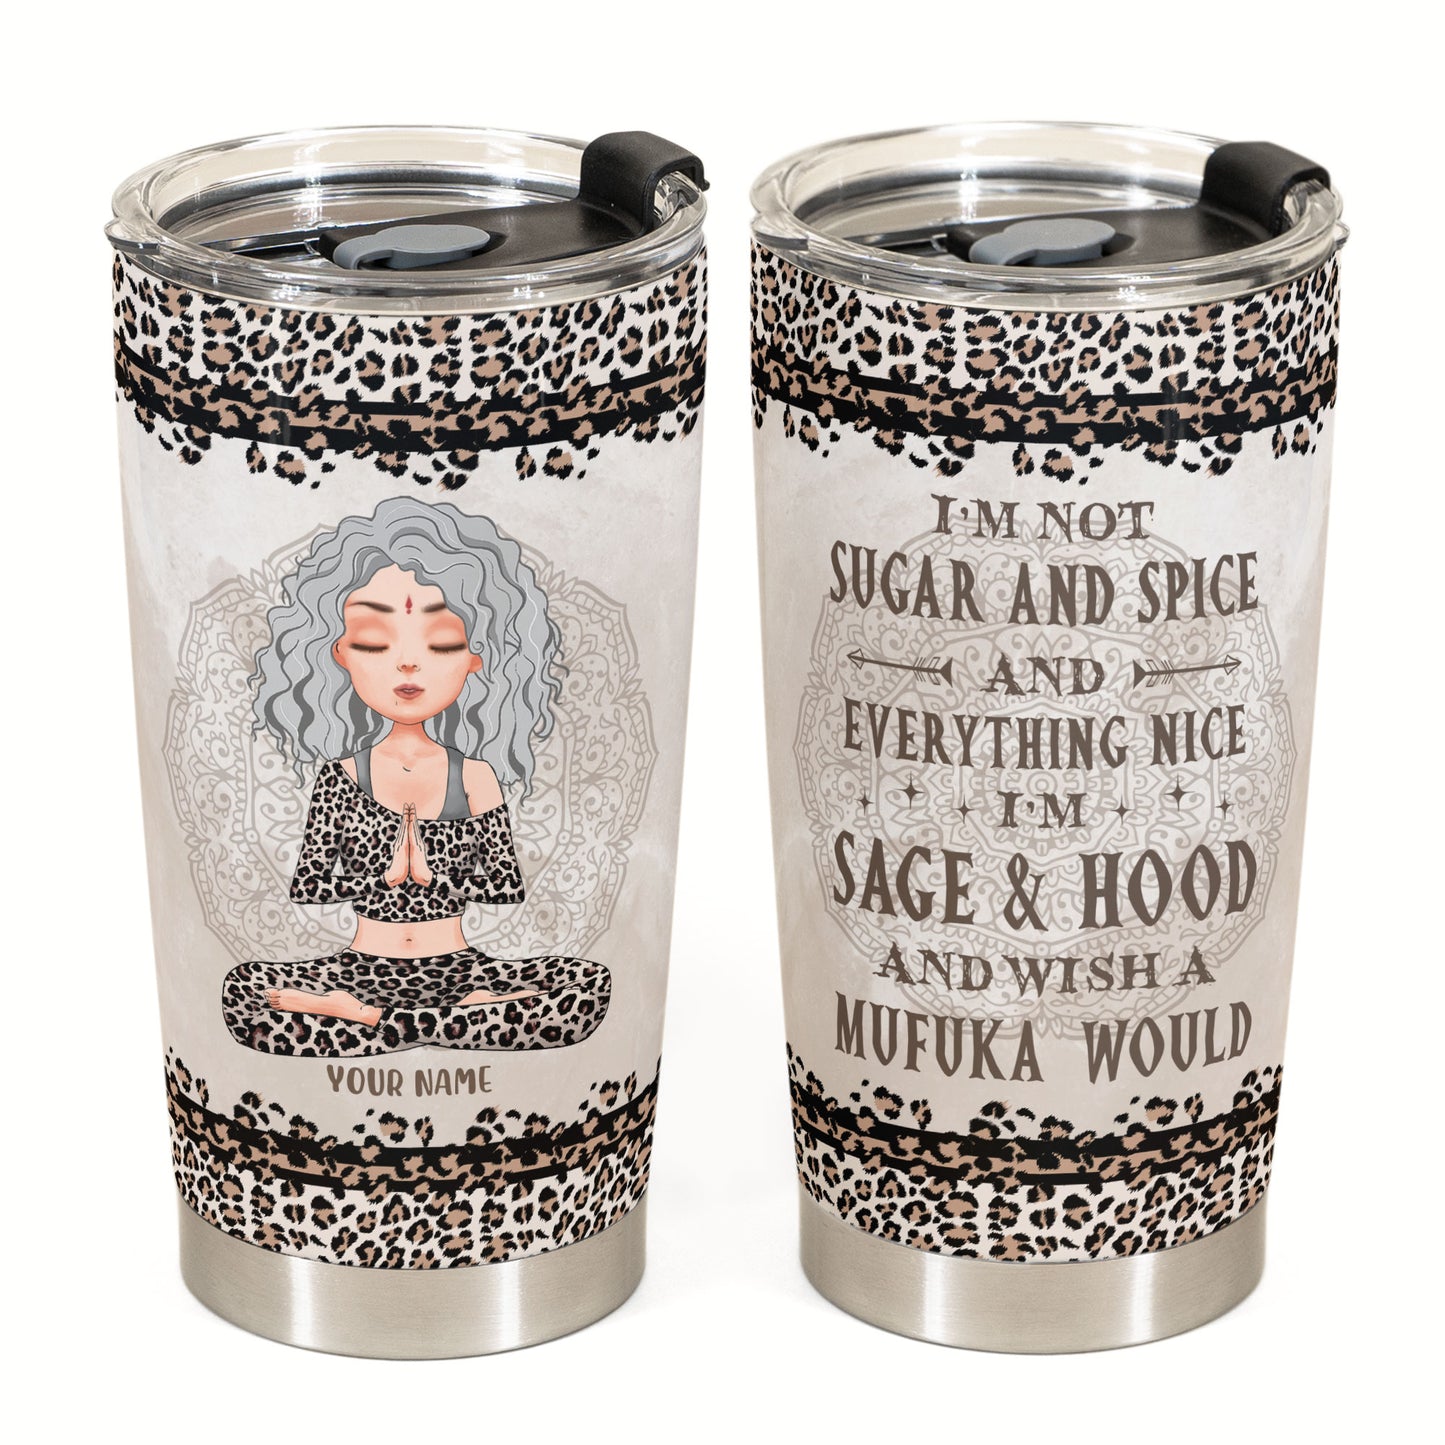 Sage & Hood - Personalized Tumbler Cup - Birthday Gift For Yoga Lover - Leopard Pattern Design